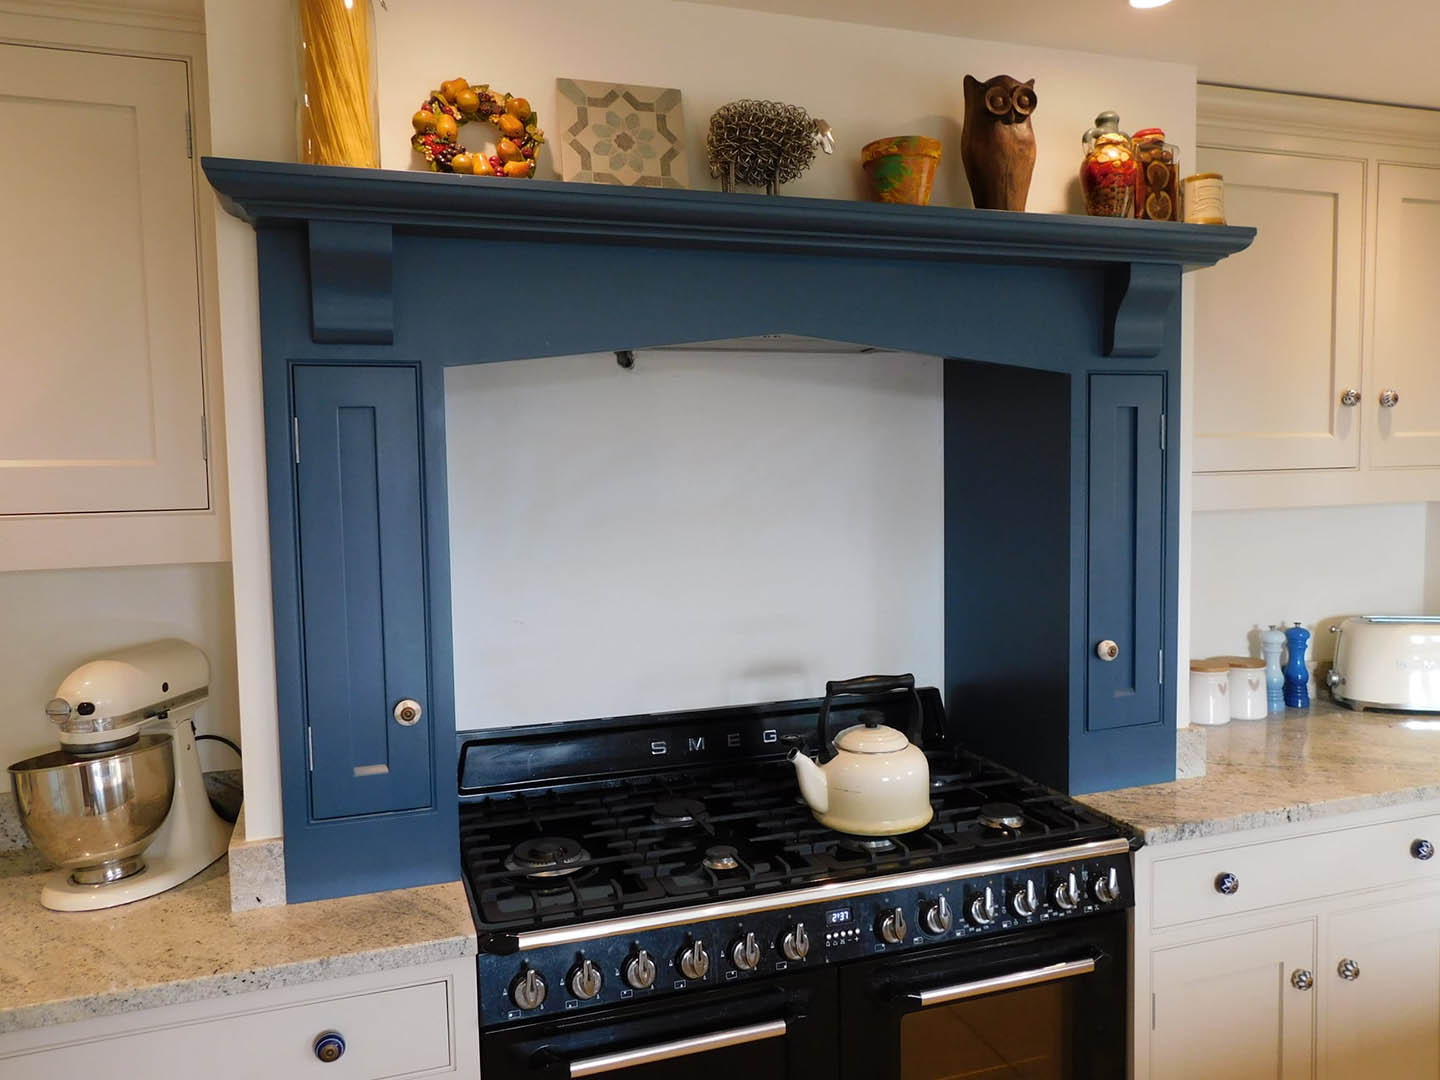 A kitchen cooker hood over a stove with a kettle on one of the hobs.